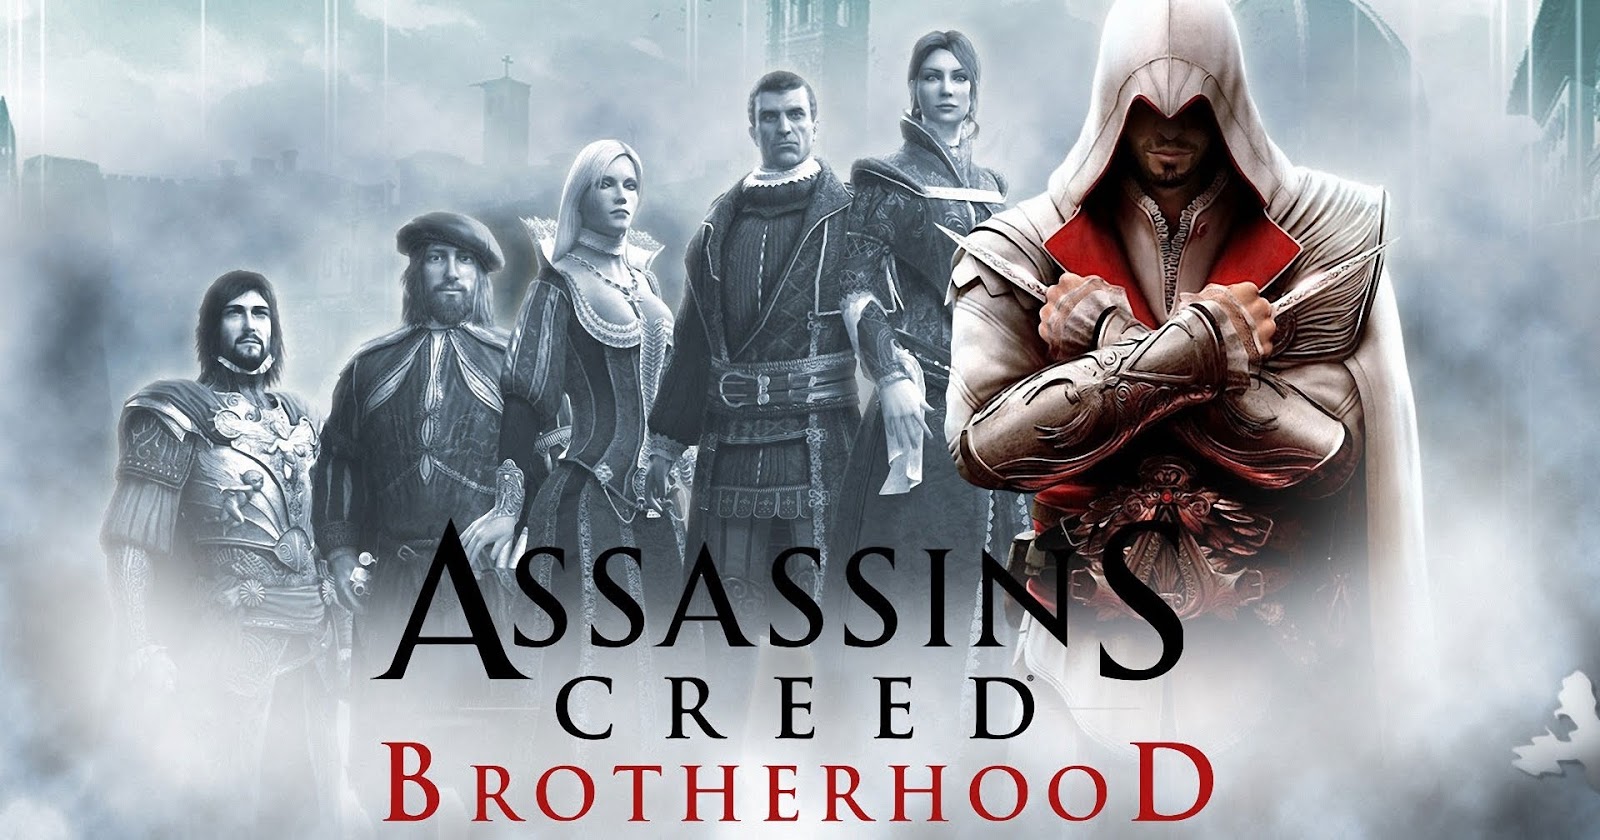 Assassin S Creed Brotherhood Complete Edition V1 03 All Dlcs For Pc 3 8 Gb Compressed Repack Pc Games Realm Download Your Favorite Pc Games For Free And Directly